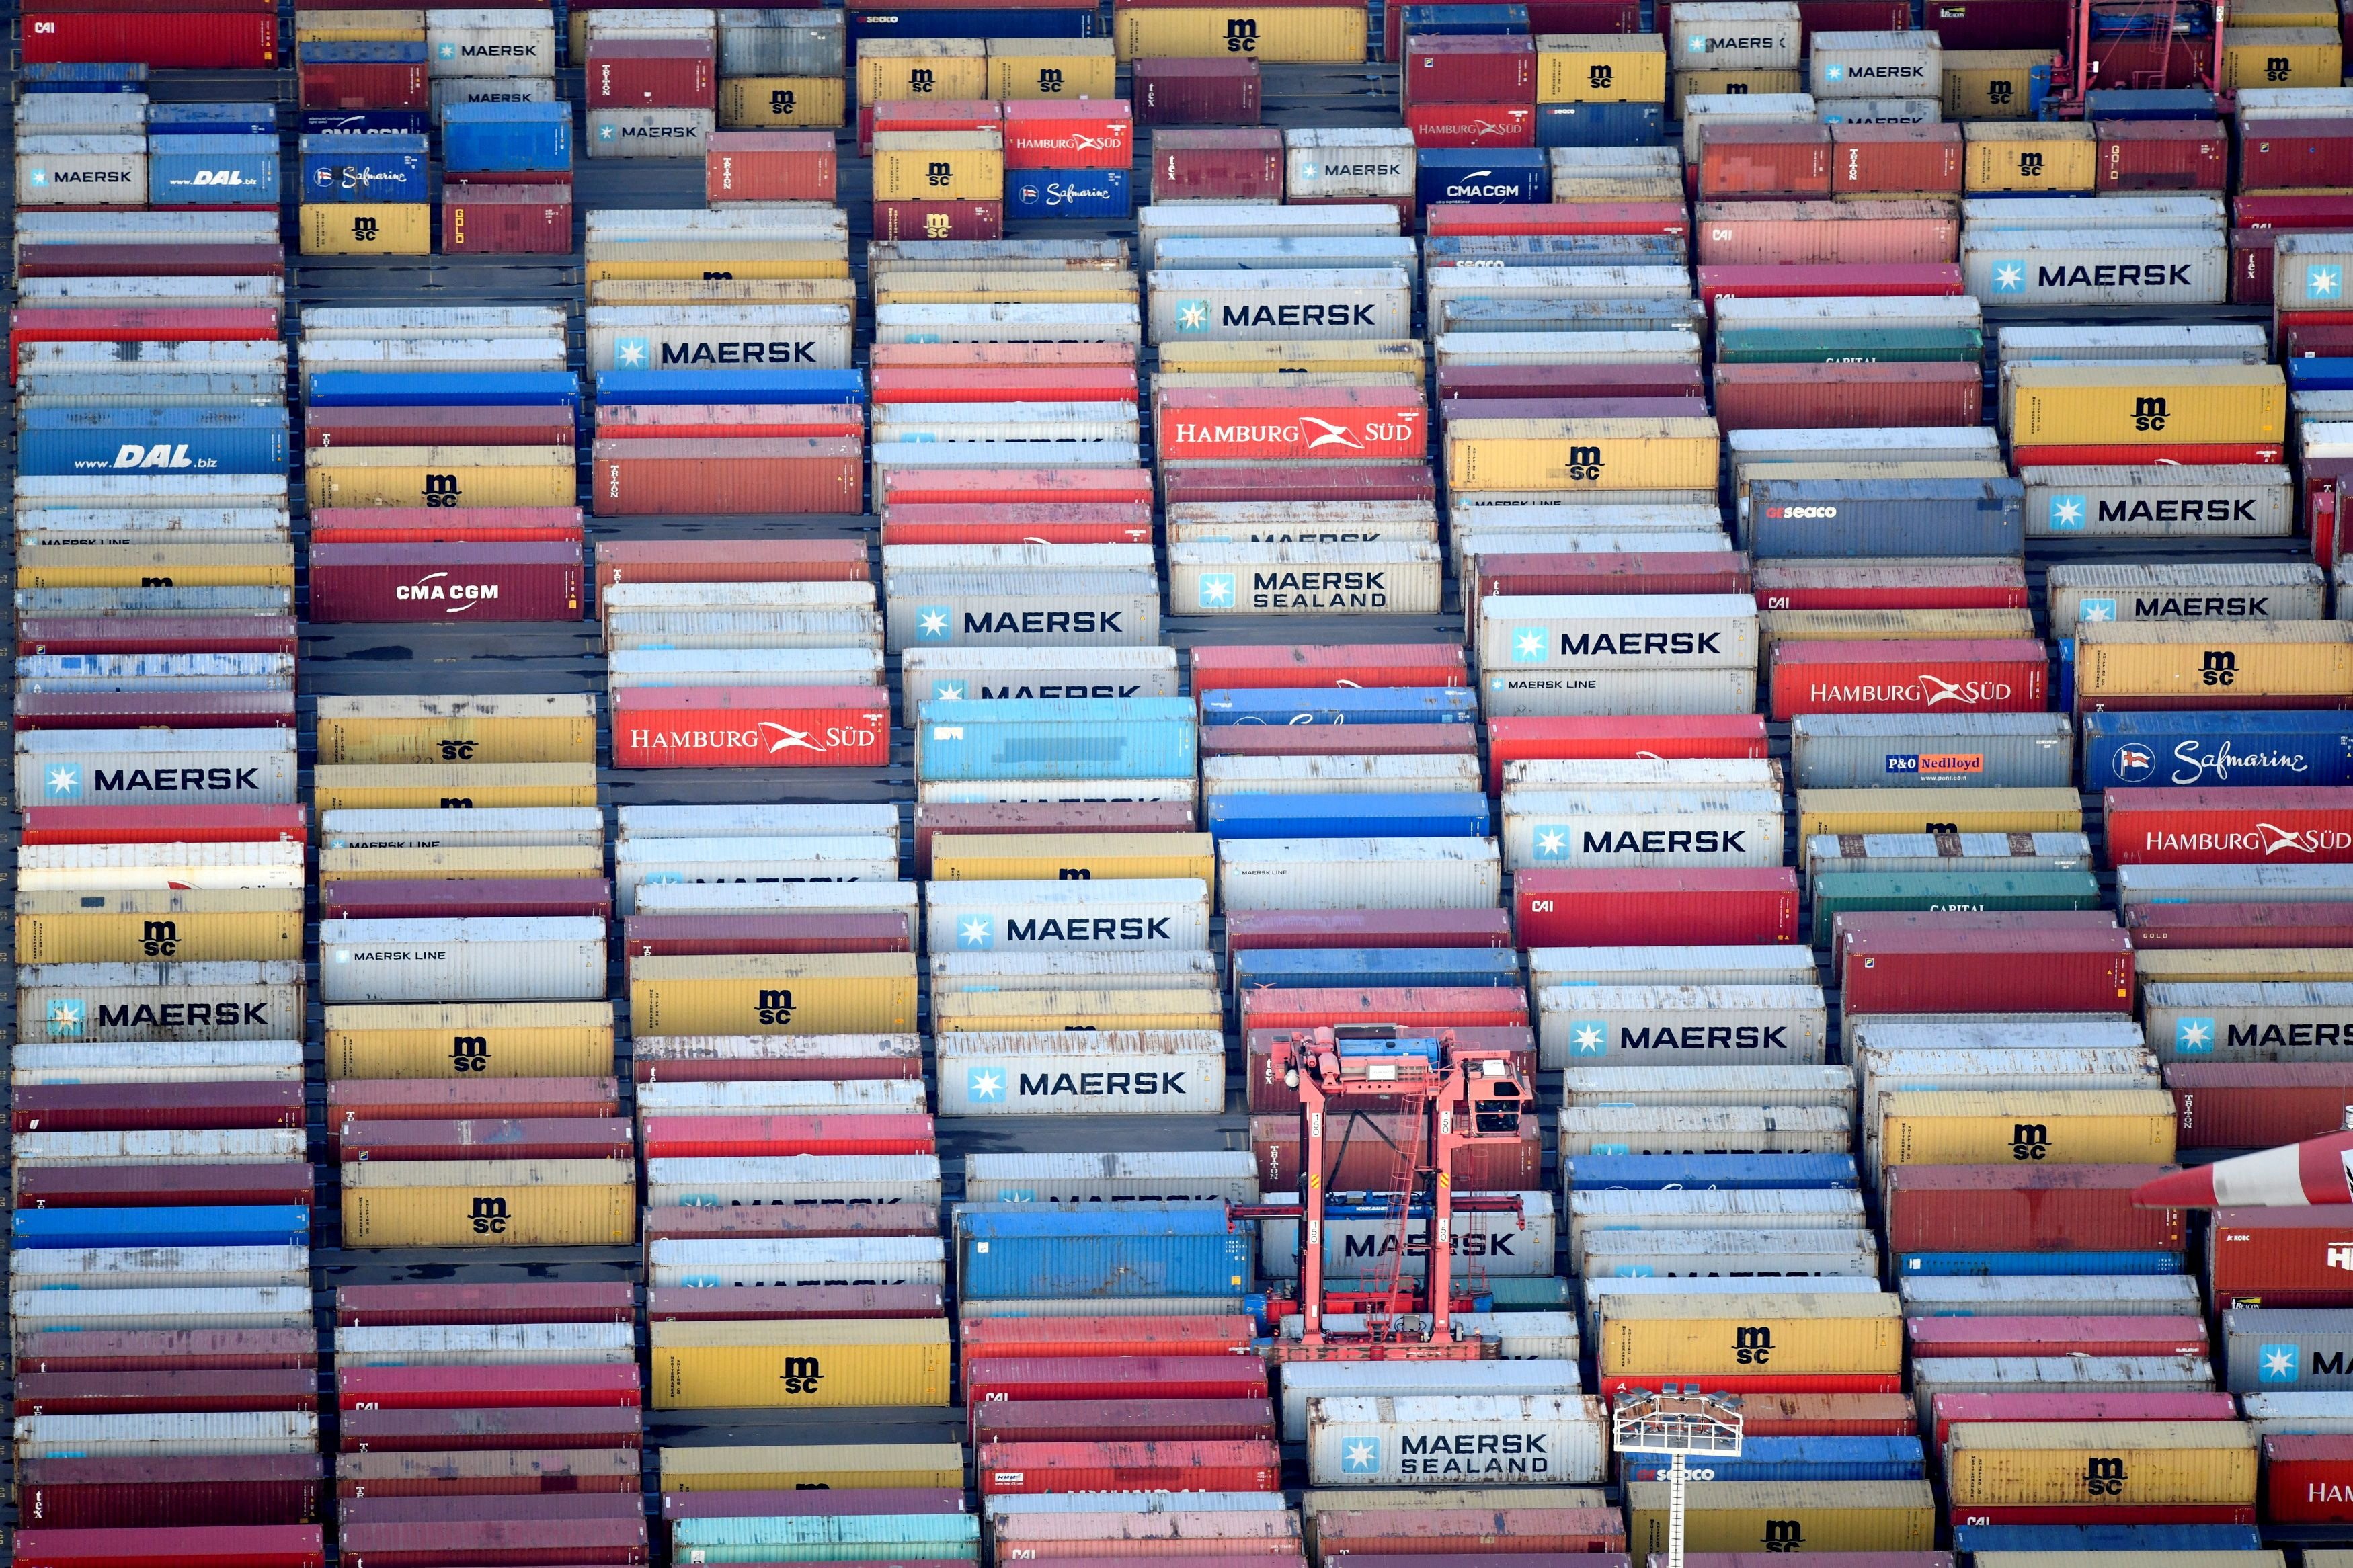 China’s exports rose by 7.1 per cent in combined figures for January and February compared to a year earlier, while imports rose by 3.5 per cent, data released on Thursday showed. Photo: Reuters